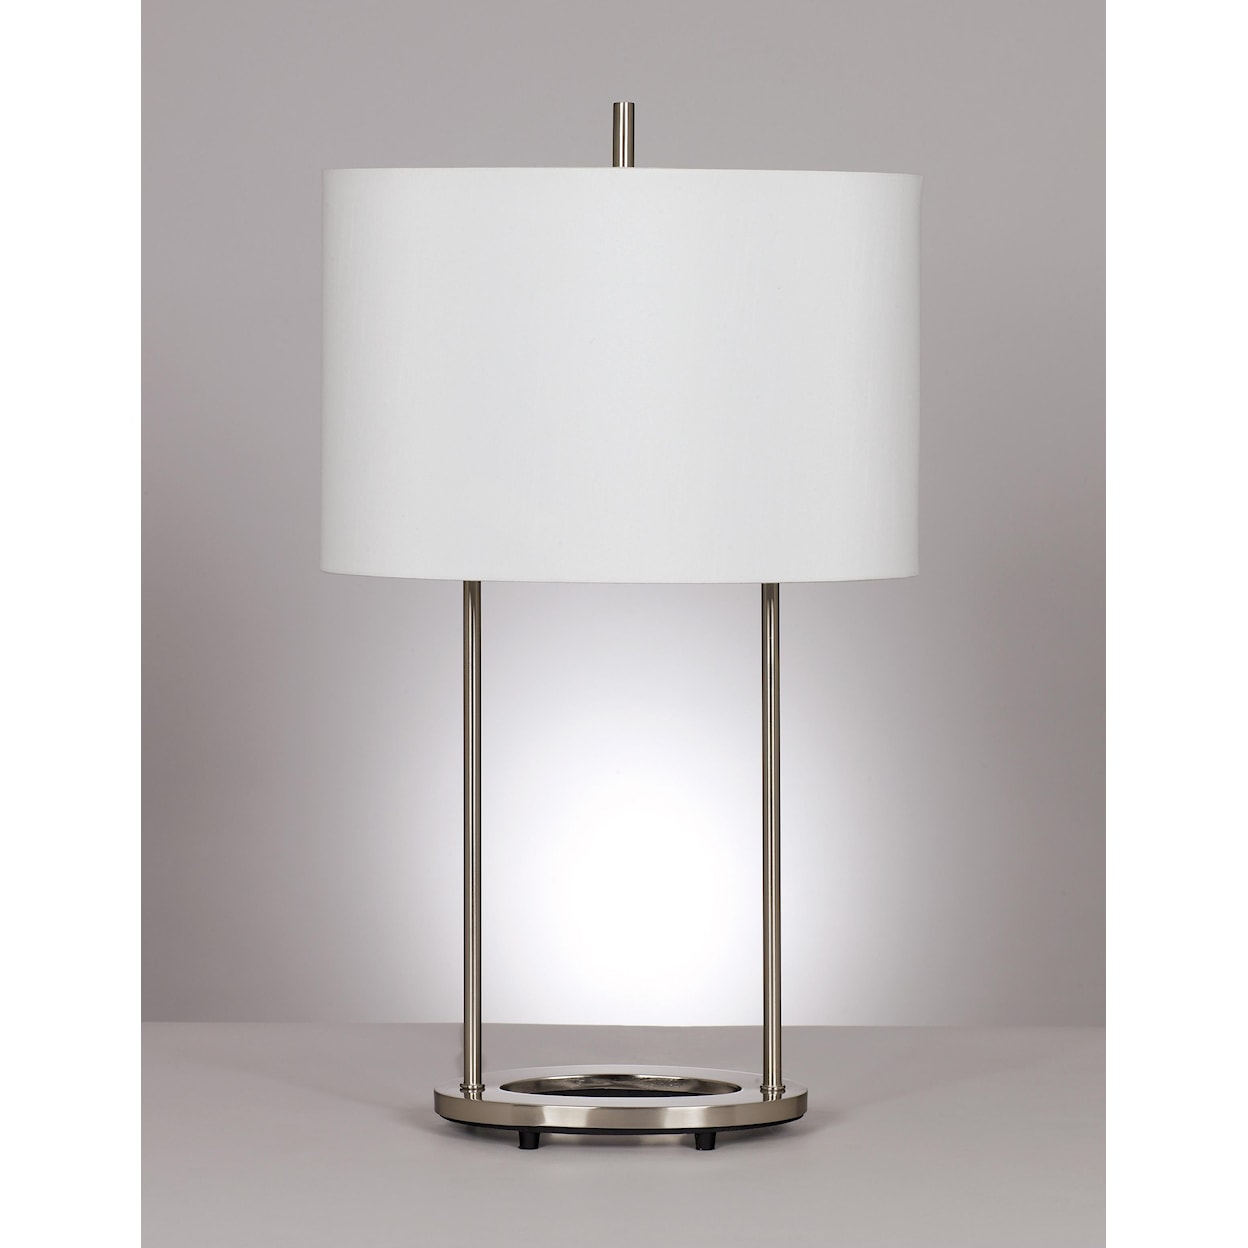 Sam's Furniture Ashley Lamps Maisie Table Lamp